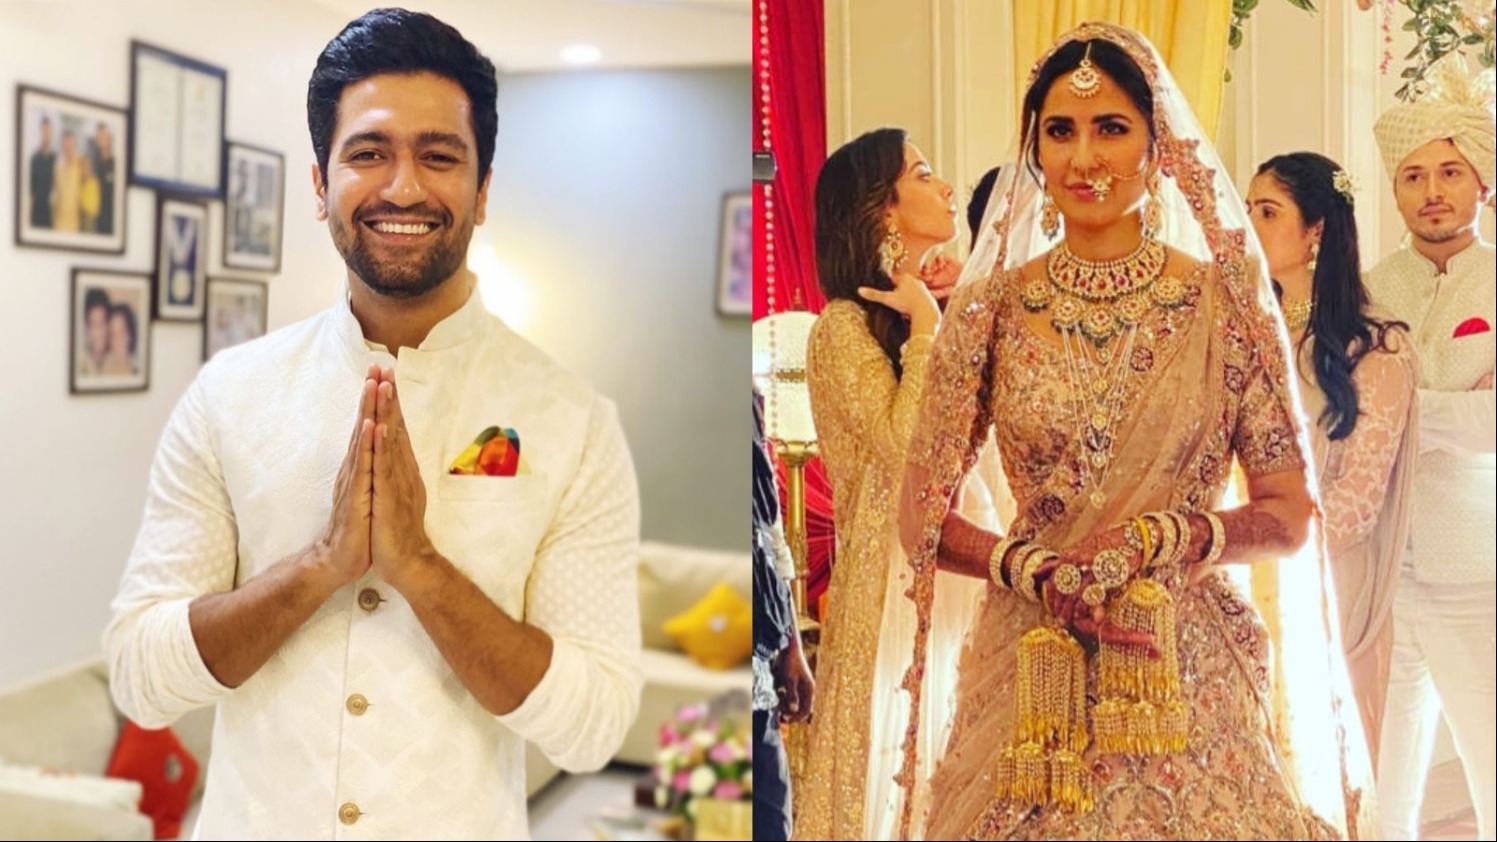 Katrina Kaif is now officially Mrs. Kaushal, marries actor Vicky Kaushal in Hindu ceremony in Rajasthan this afternoon